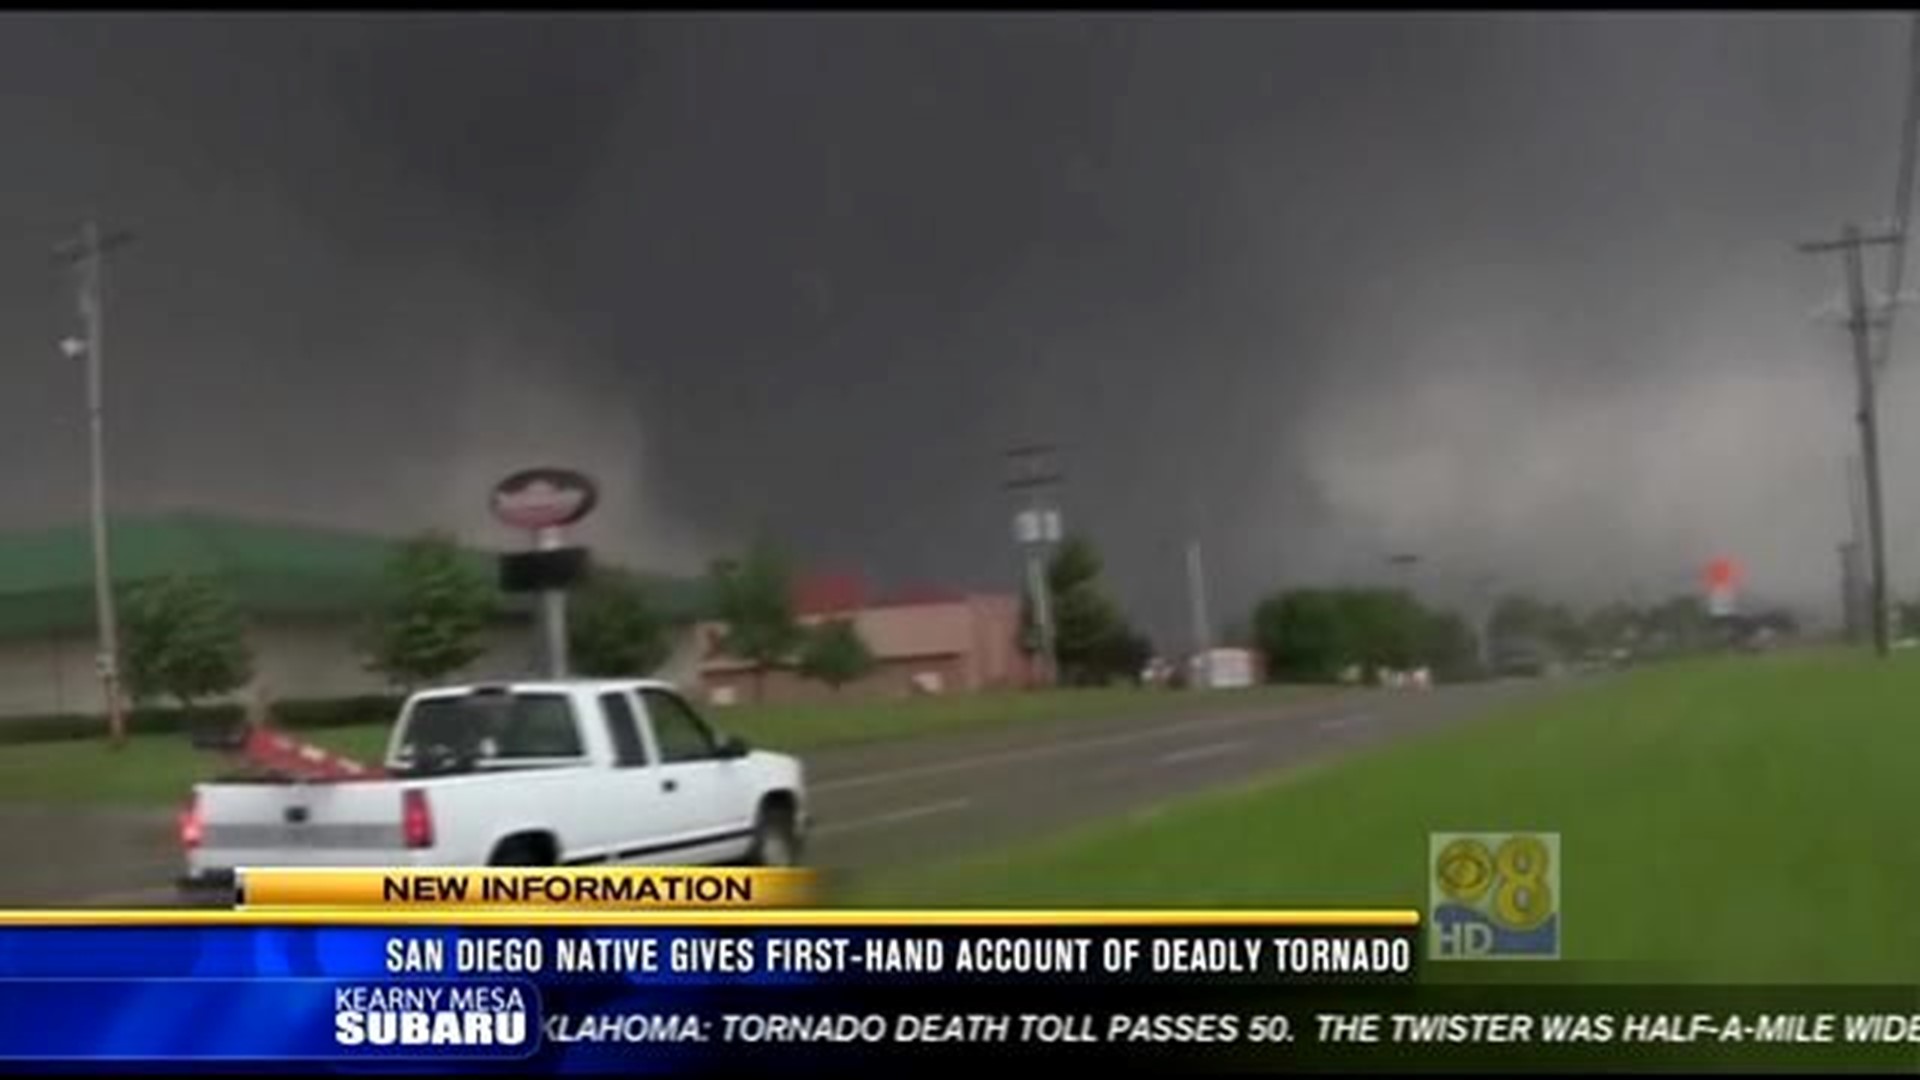 San Diego native gives firsthand account of deadly tornado